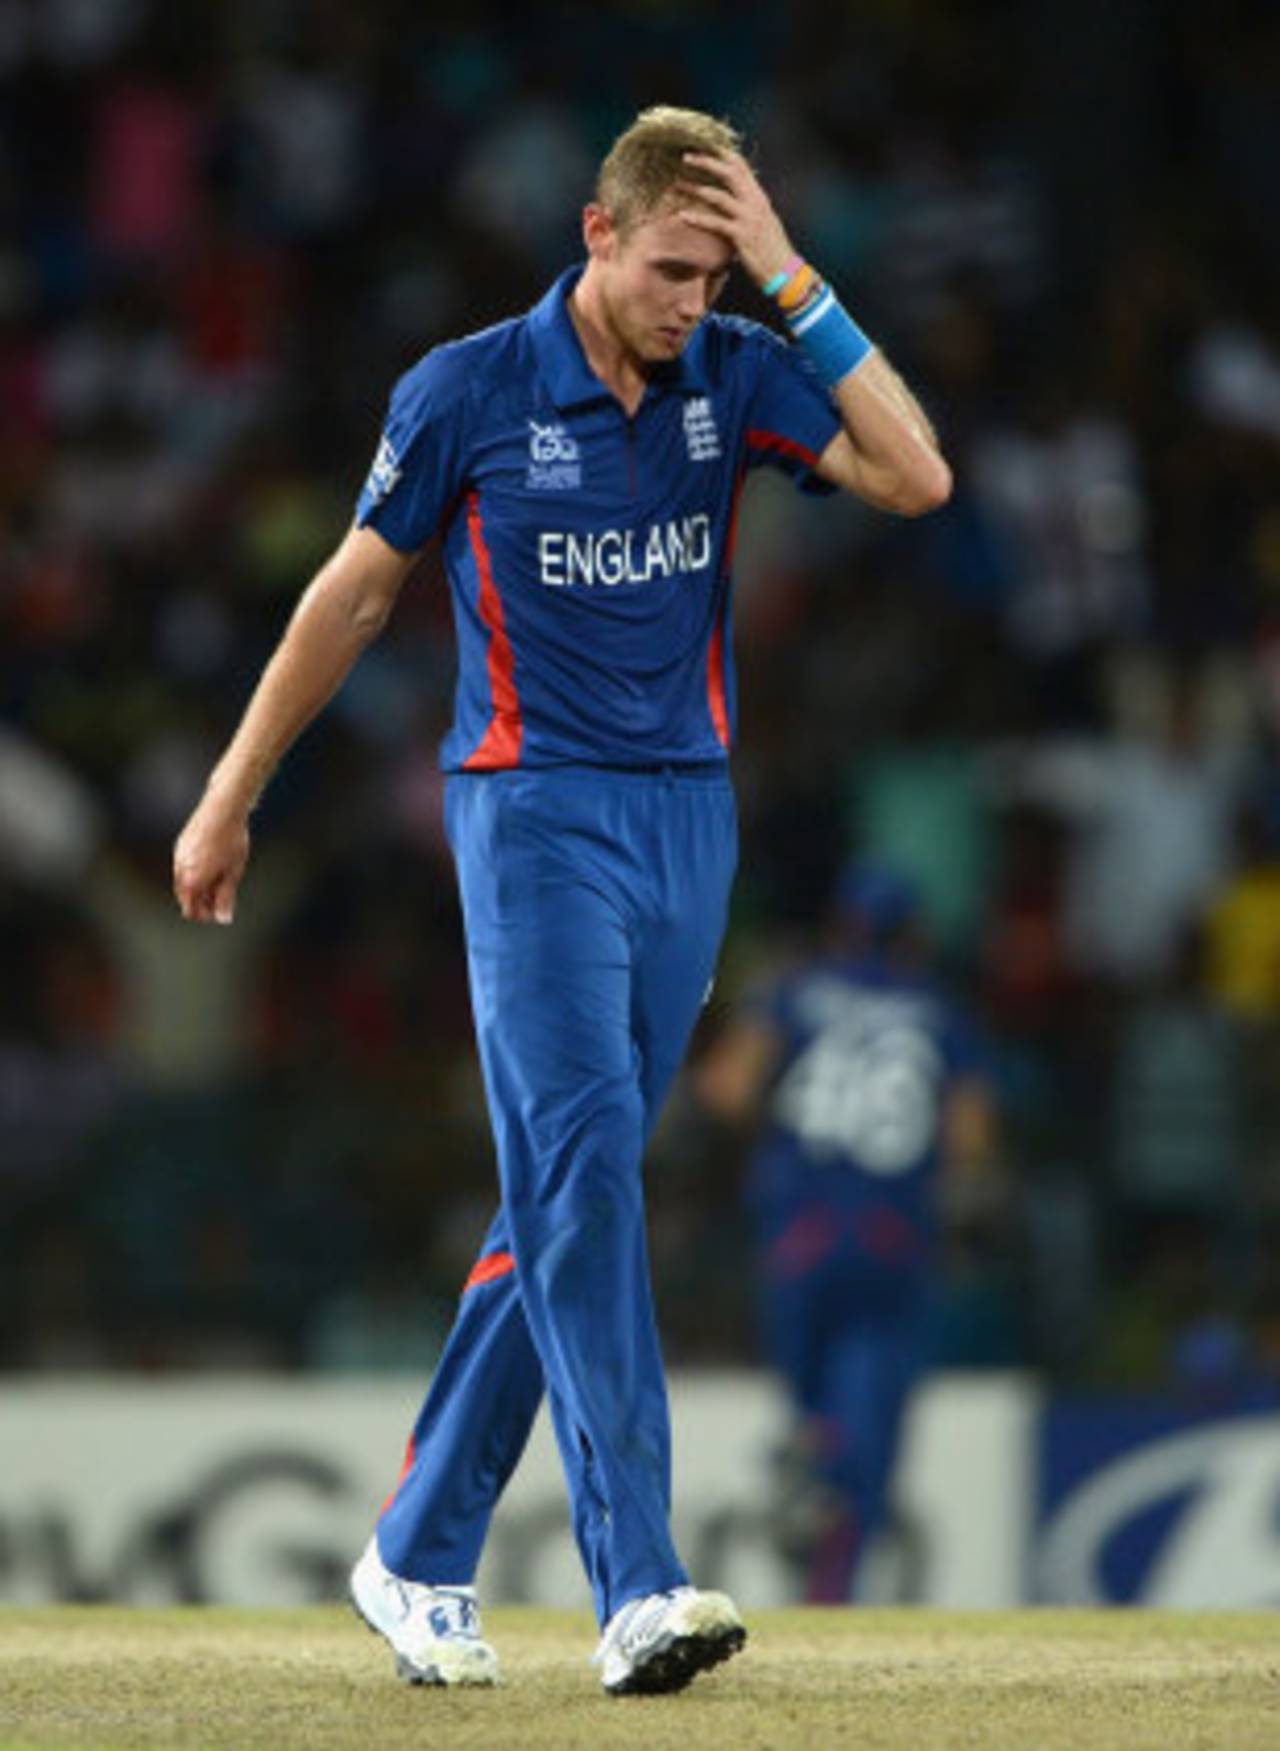 On top of everything else, the defeat messed up Stuart Broad's coiffure&nbsp;&nbsp;&bull;&nbsp;&nbsp;Getty Images